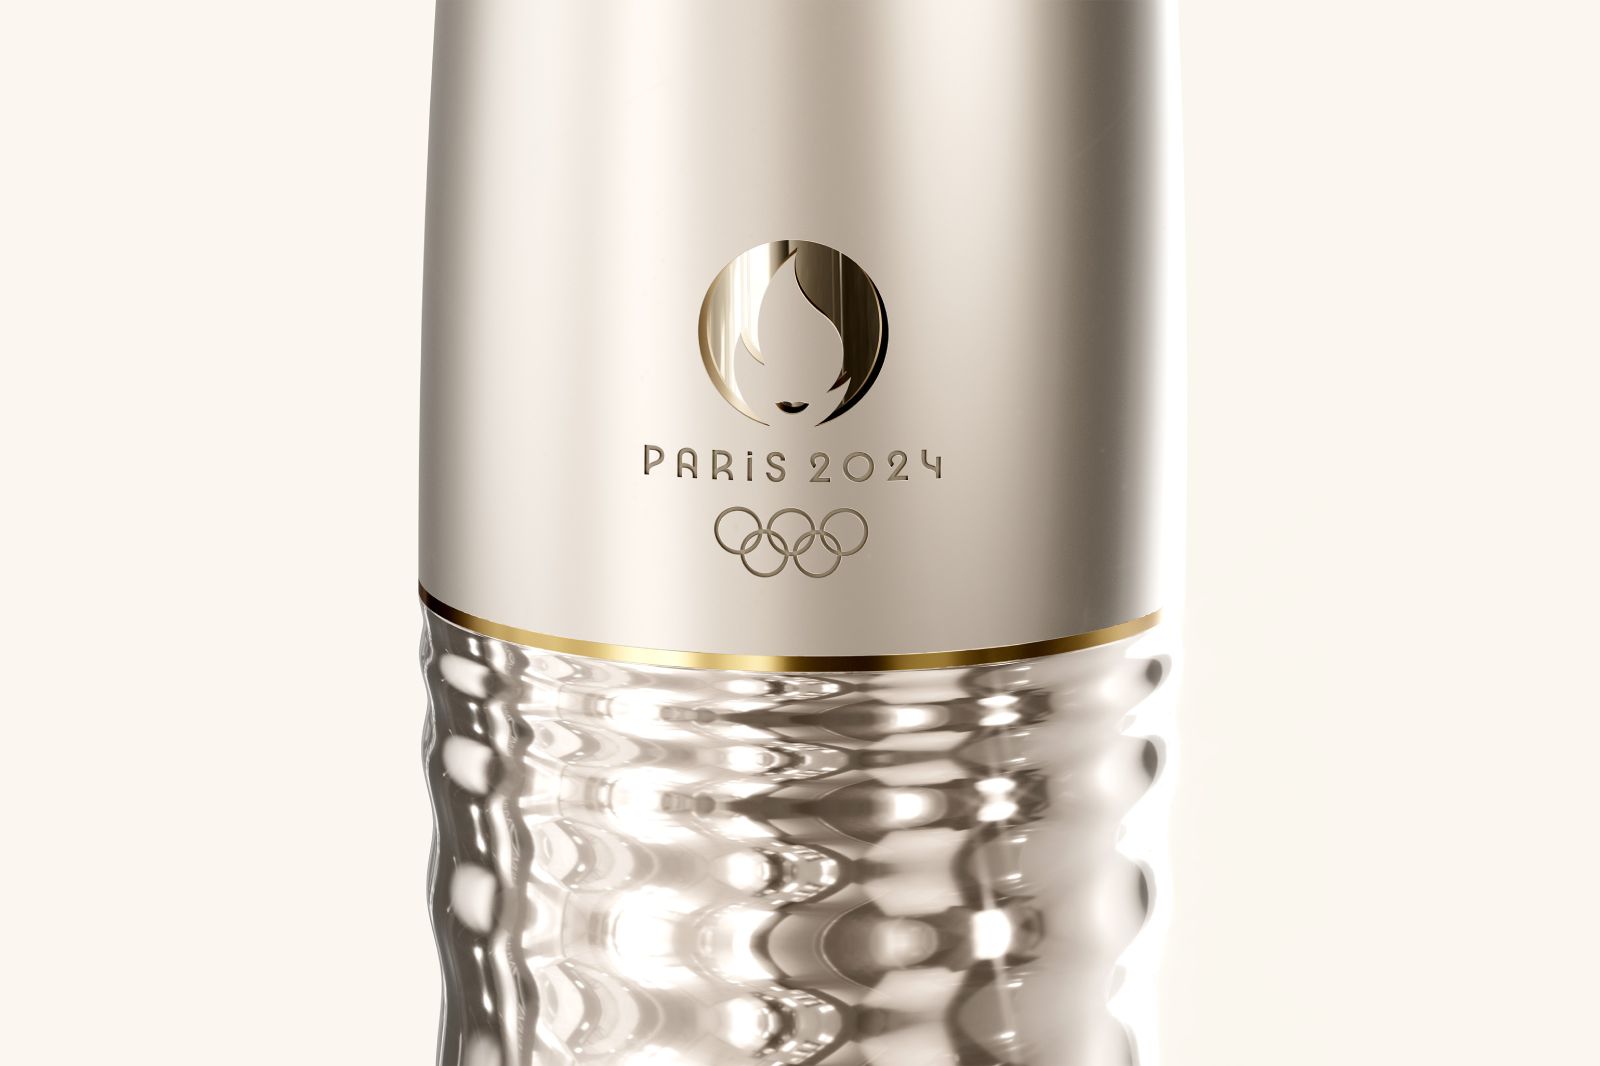 10cm wide midsection of Paris 2024 Olympic Games torch revealed July 25, 2023 (©Paris 2024)